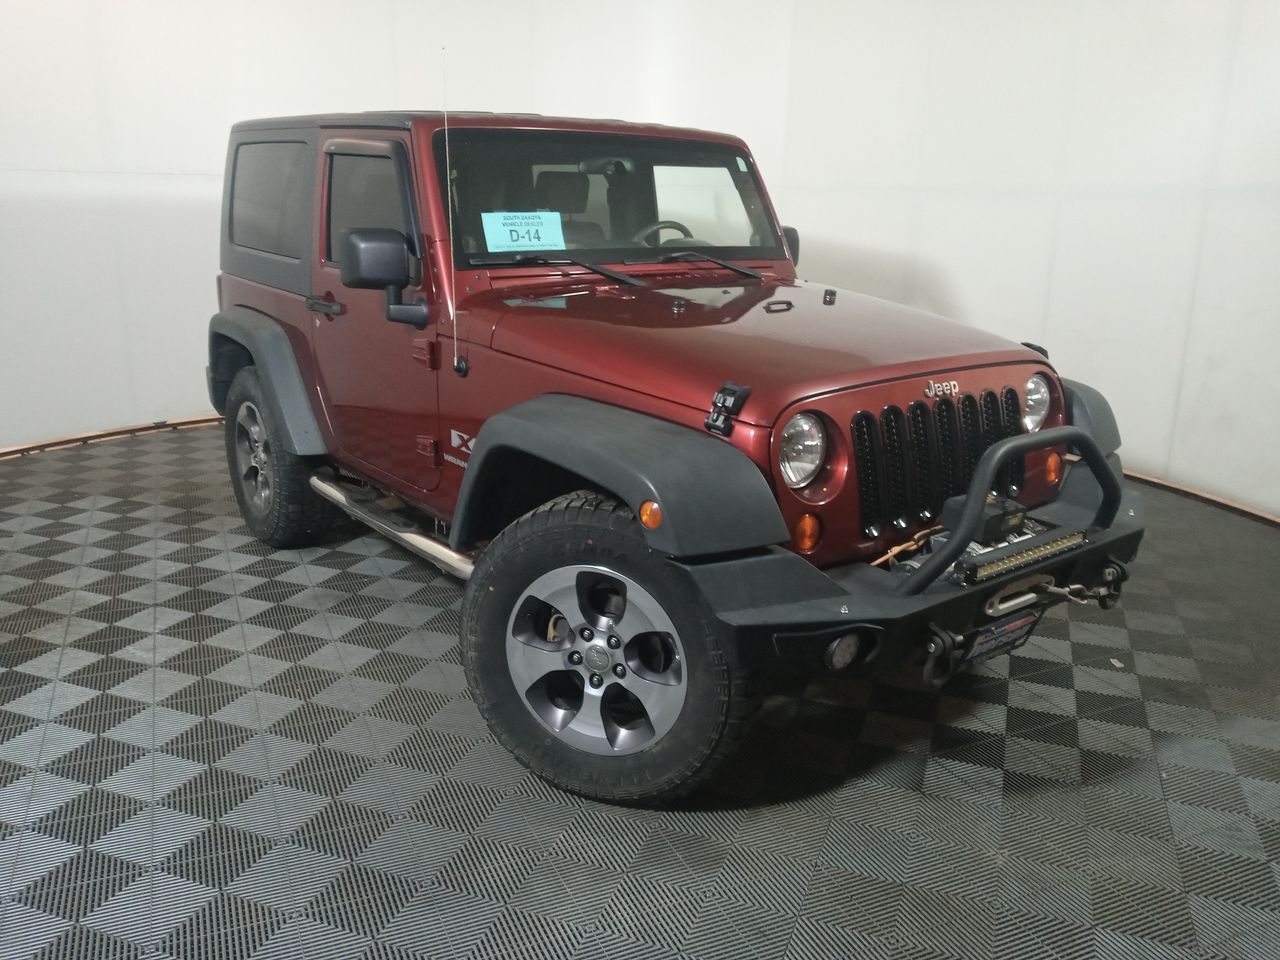 2008 Jeep Wrangler For Sale In Mitchell, SD ®